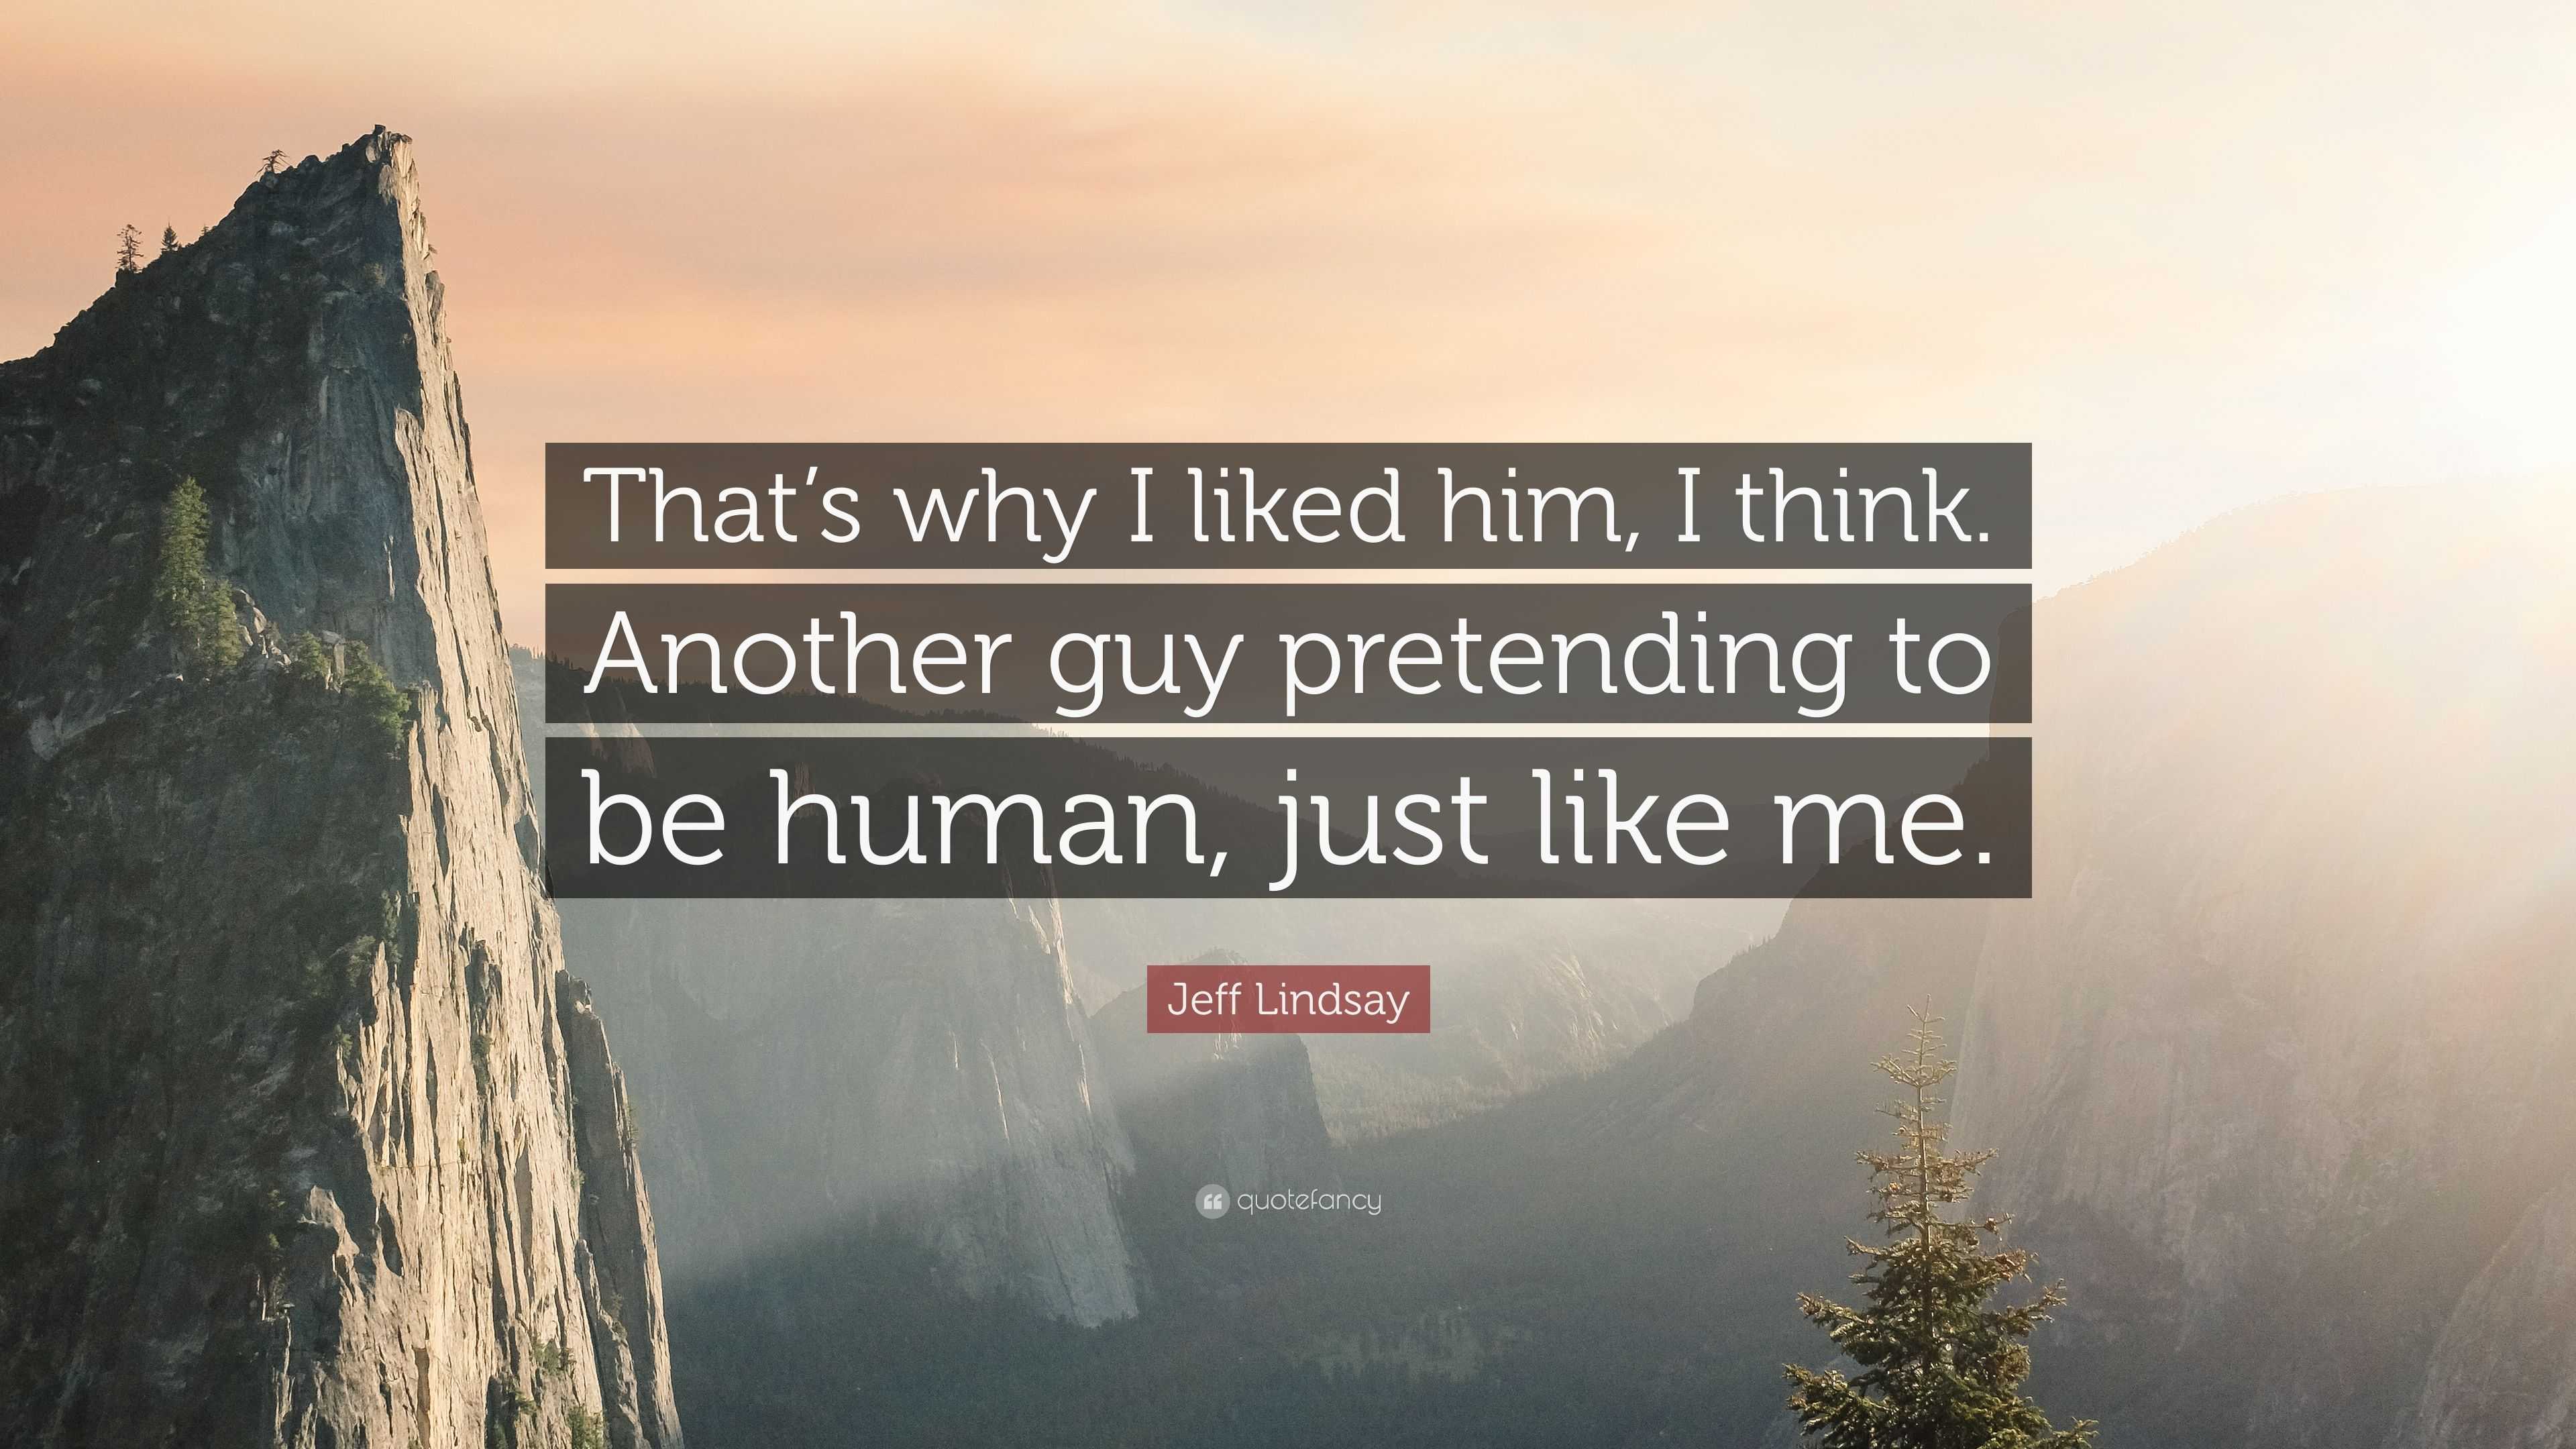 Jeff Lindsay Quote: “That's why I liked him, I think. Another guy pretending  to be human